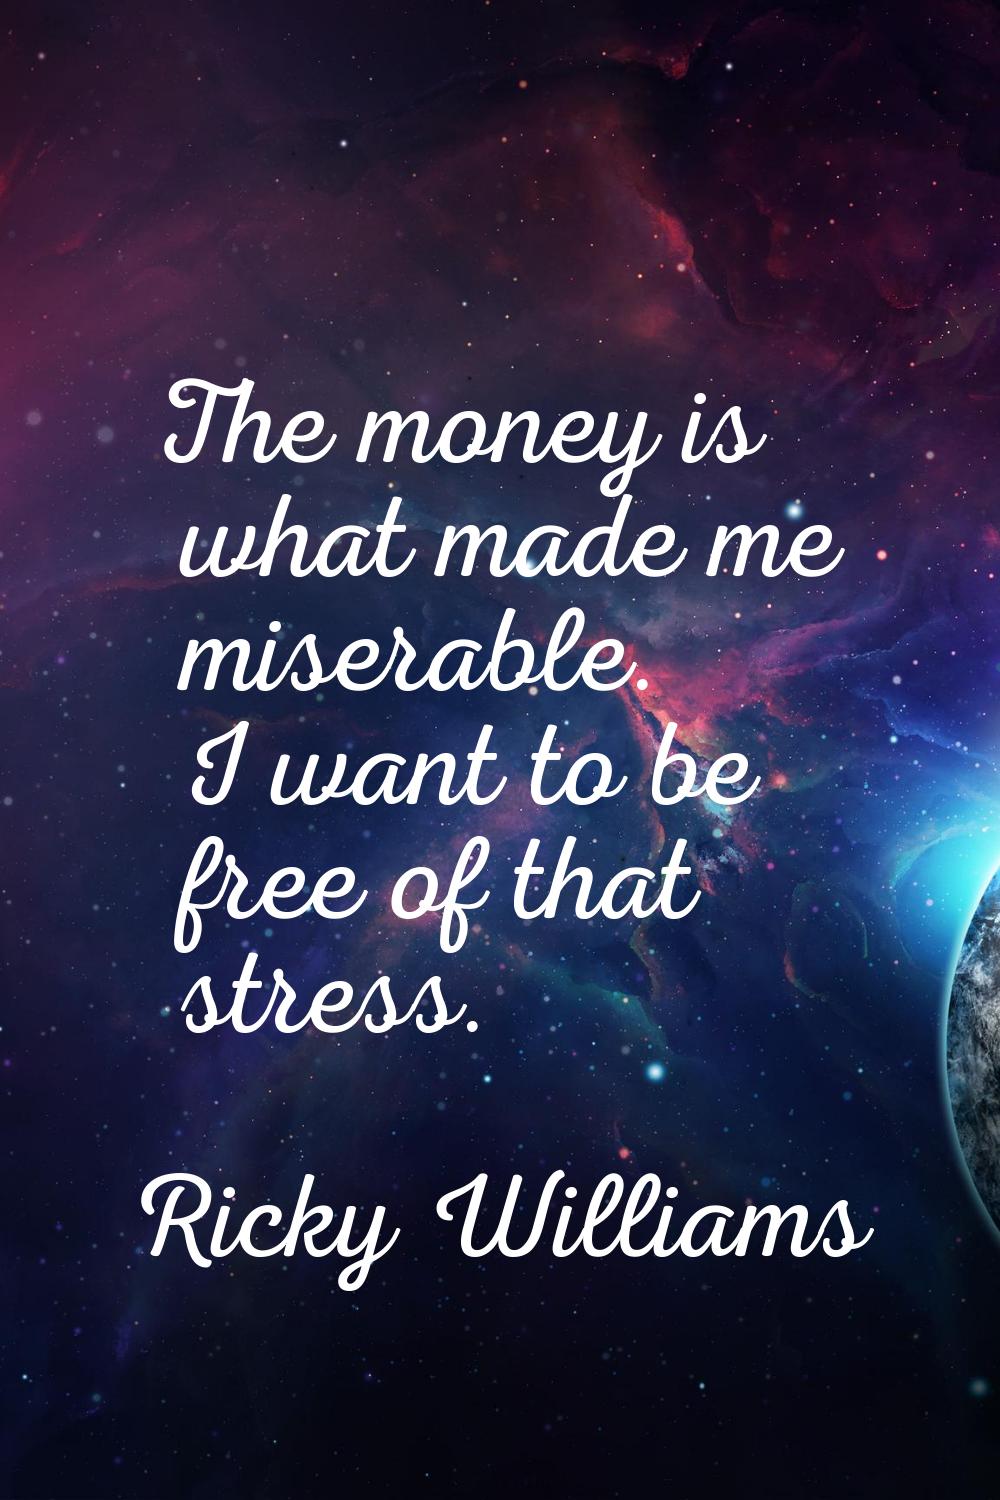 The money is what made me miserable. I want to be free of that stress.